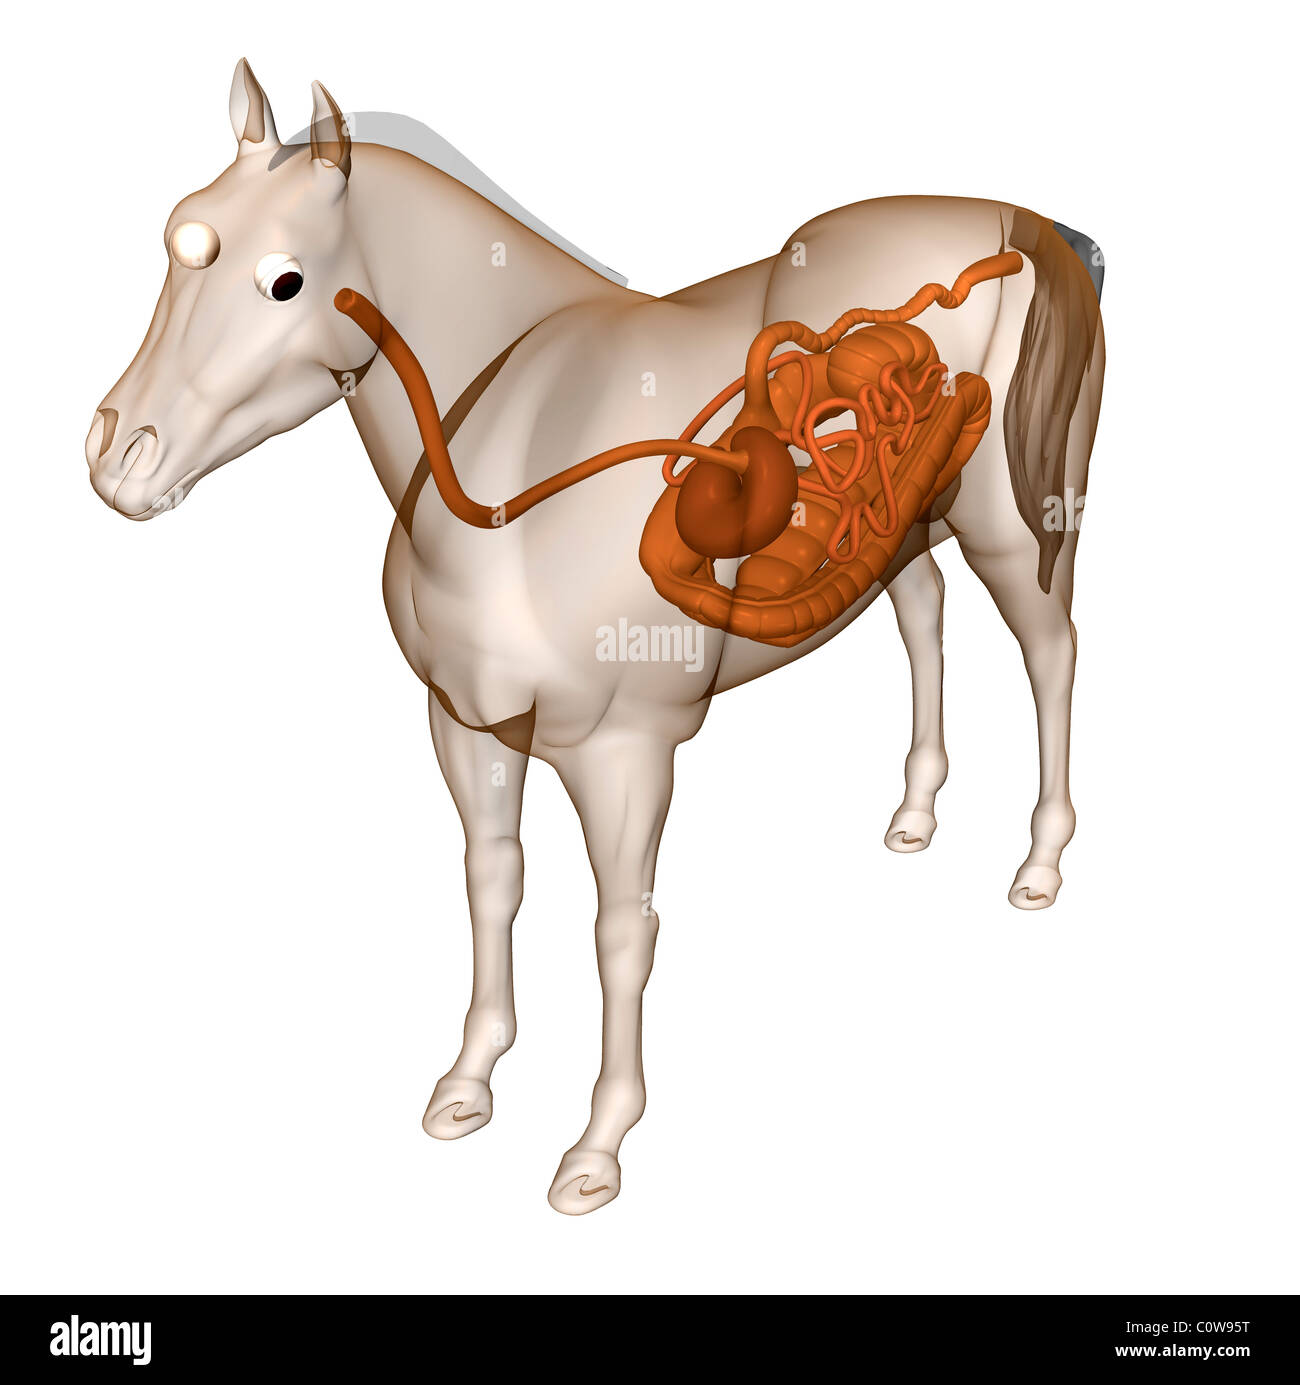 horse anatomy digestion stomach guts tract duodenum transparent body Stock Photo